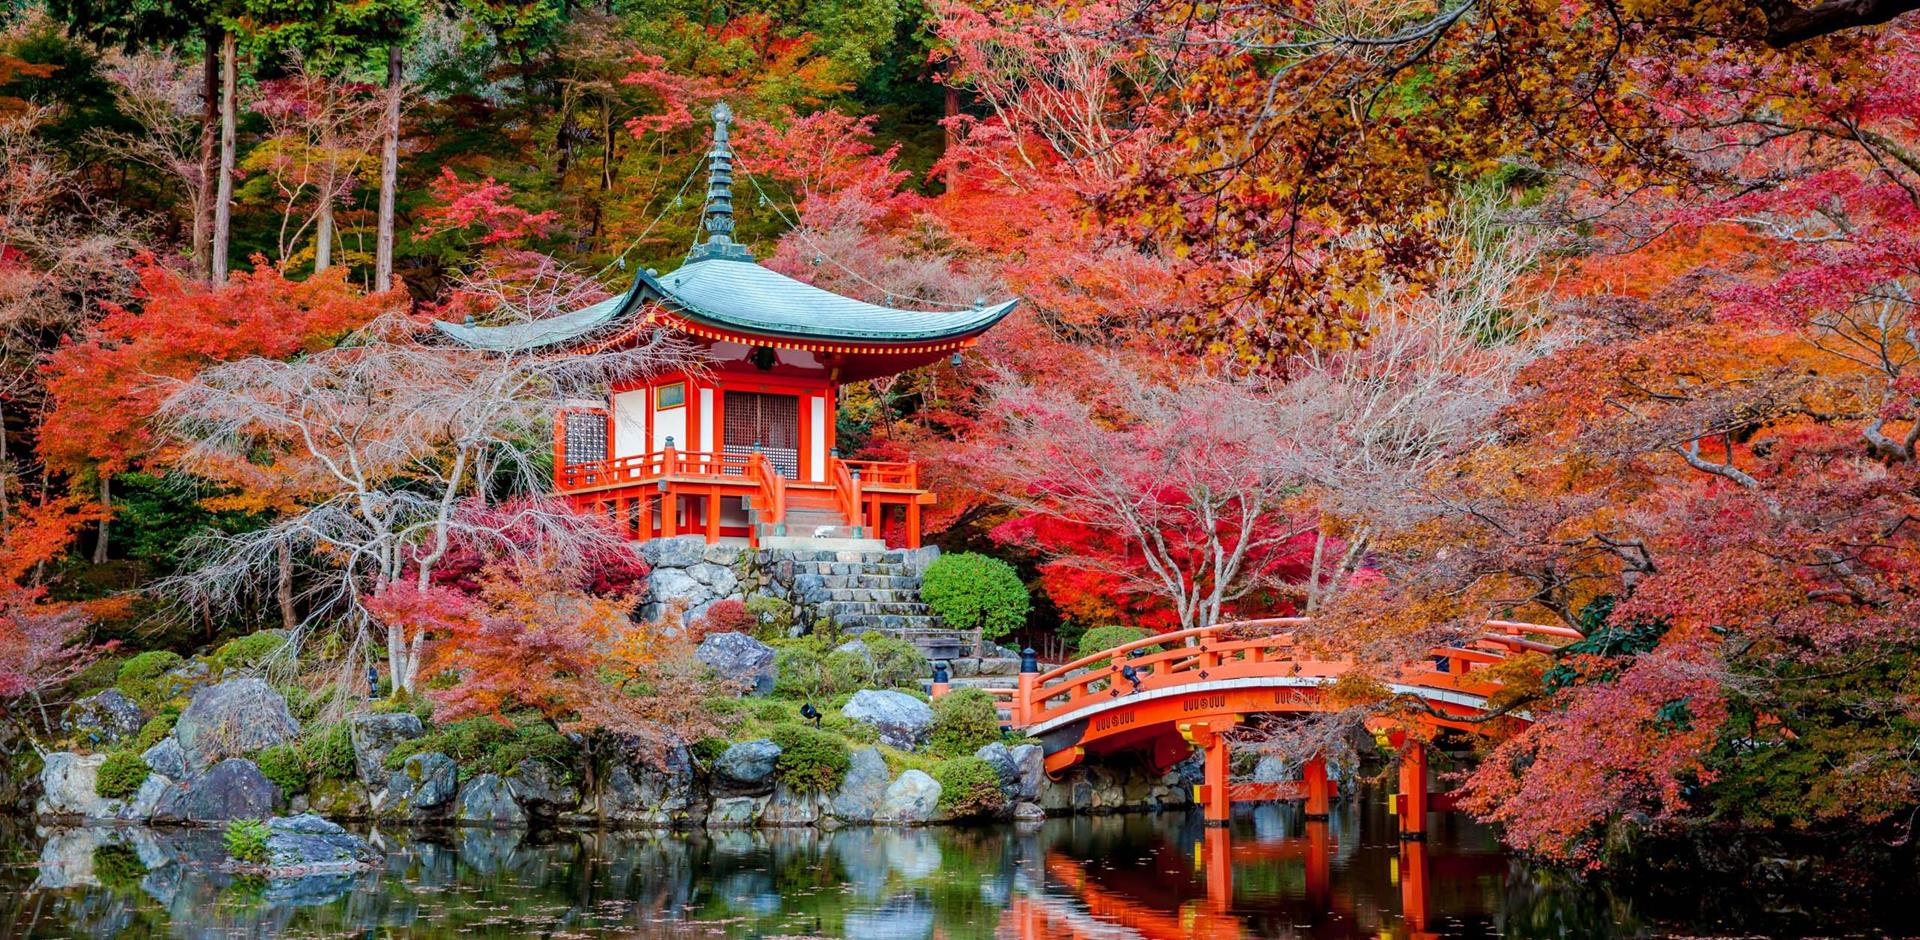 Traditional Japanese temple and bridge in Kyoto, Japan